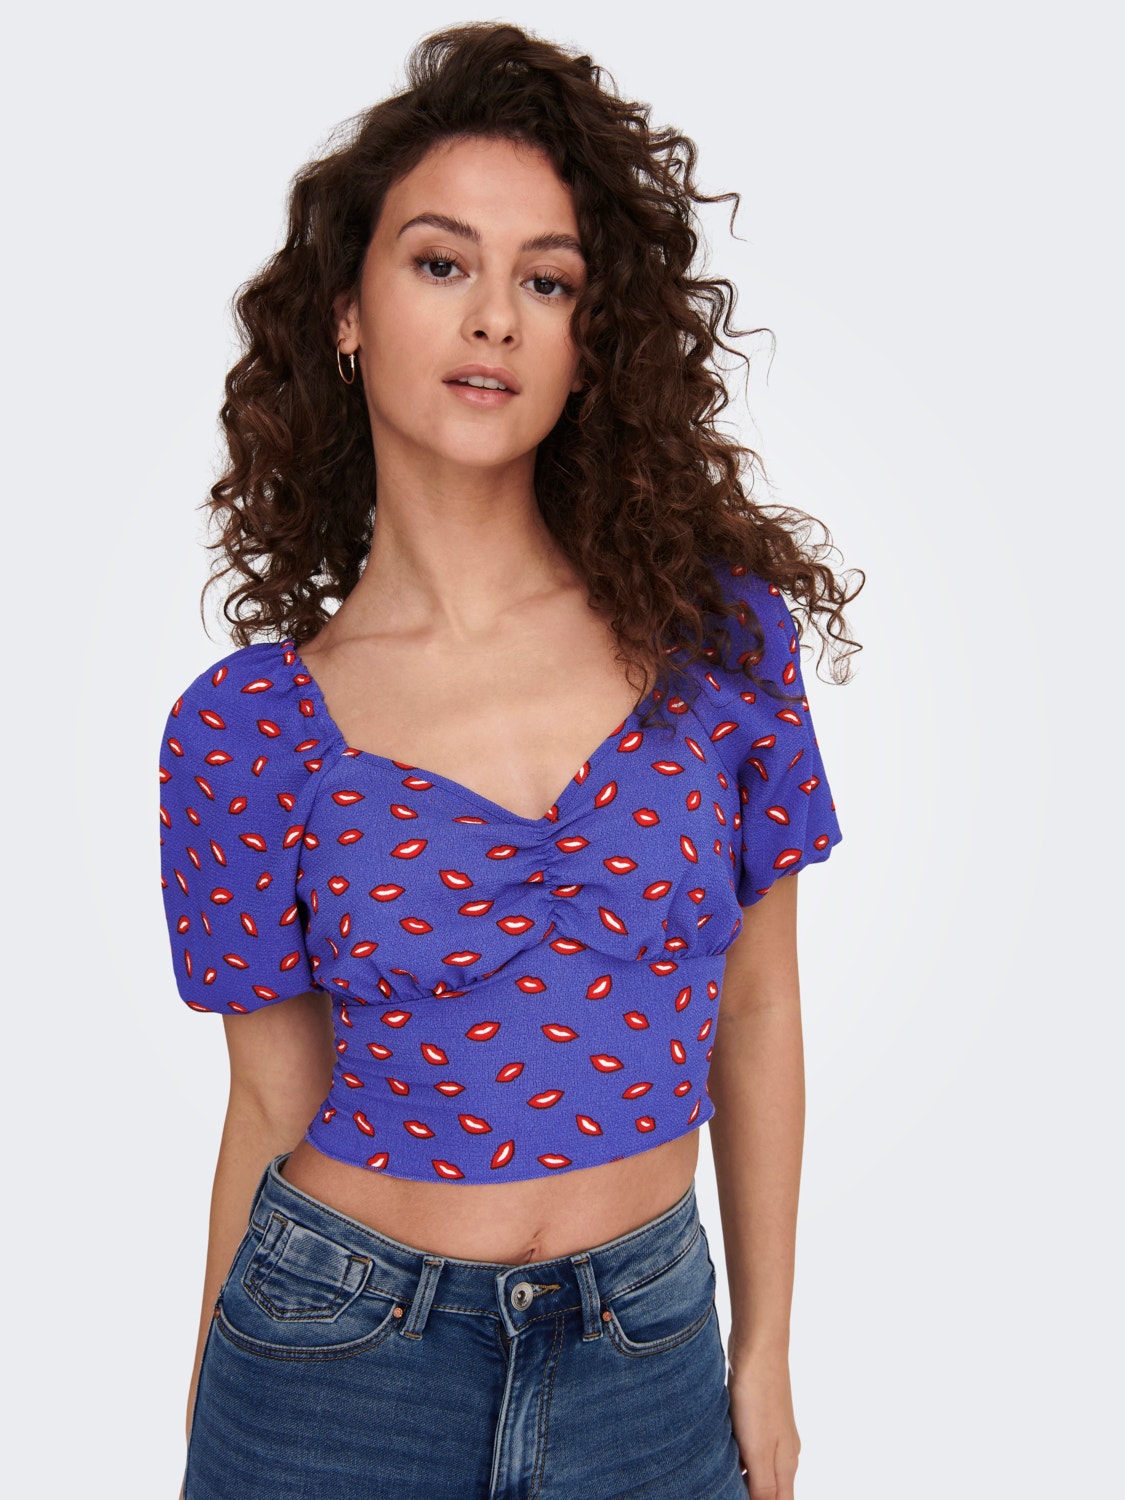 ONLY Cropped Top with Puff Sleeves -Dazzling Blue - 15283645